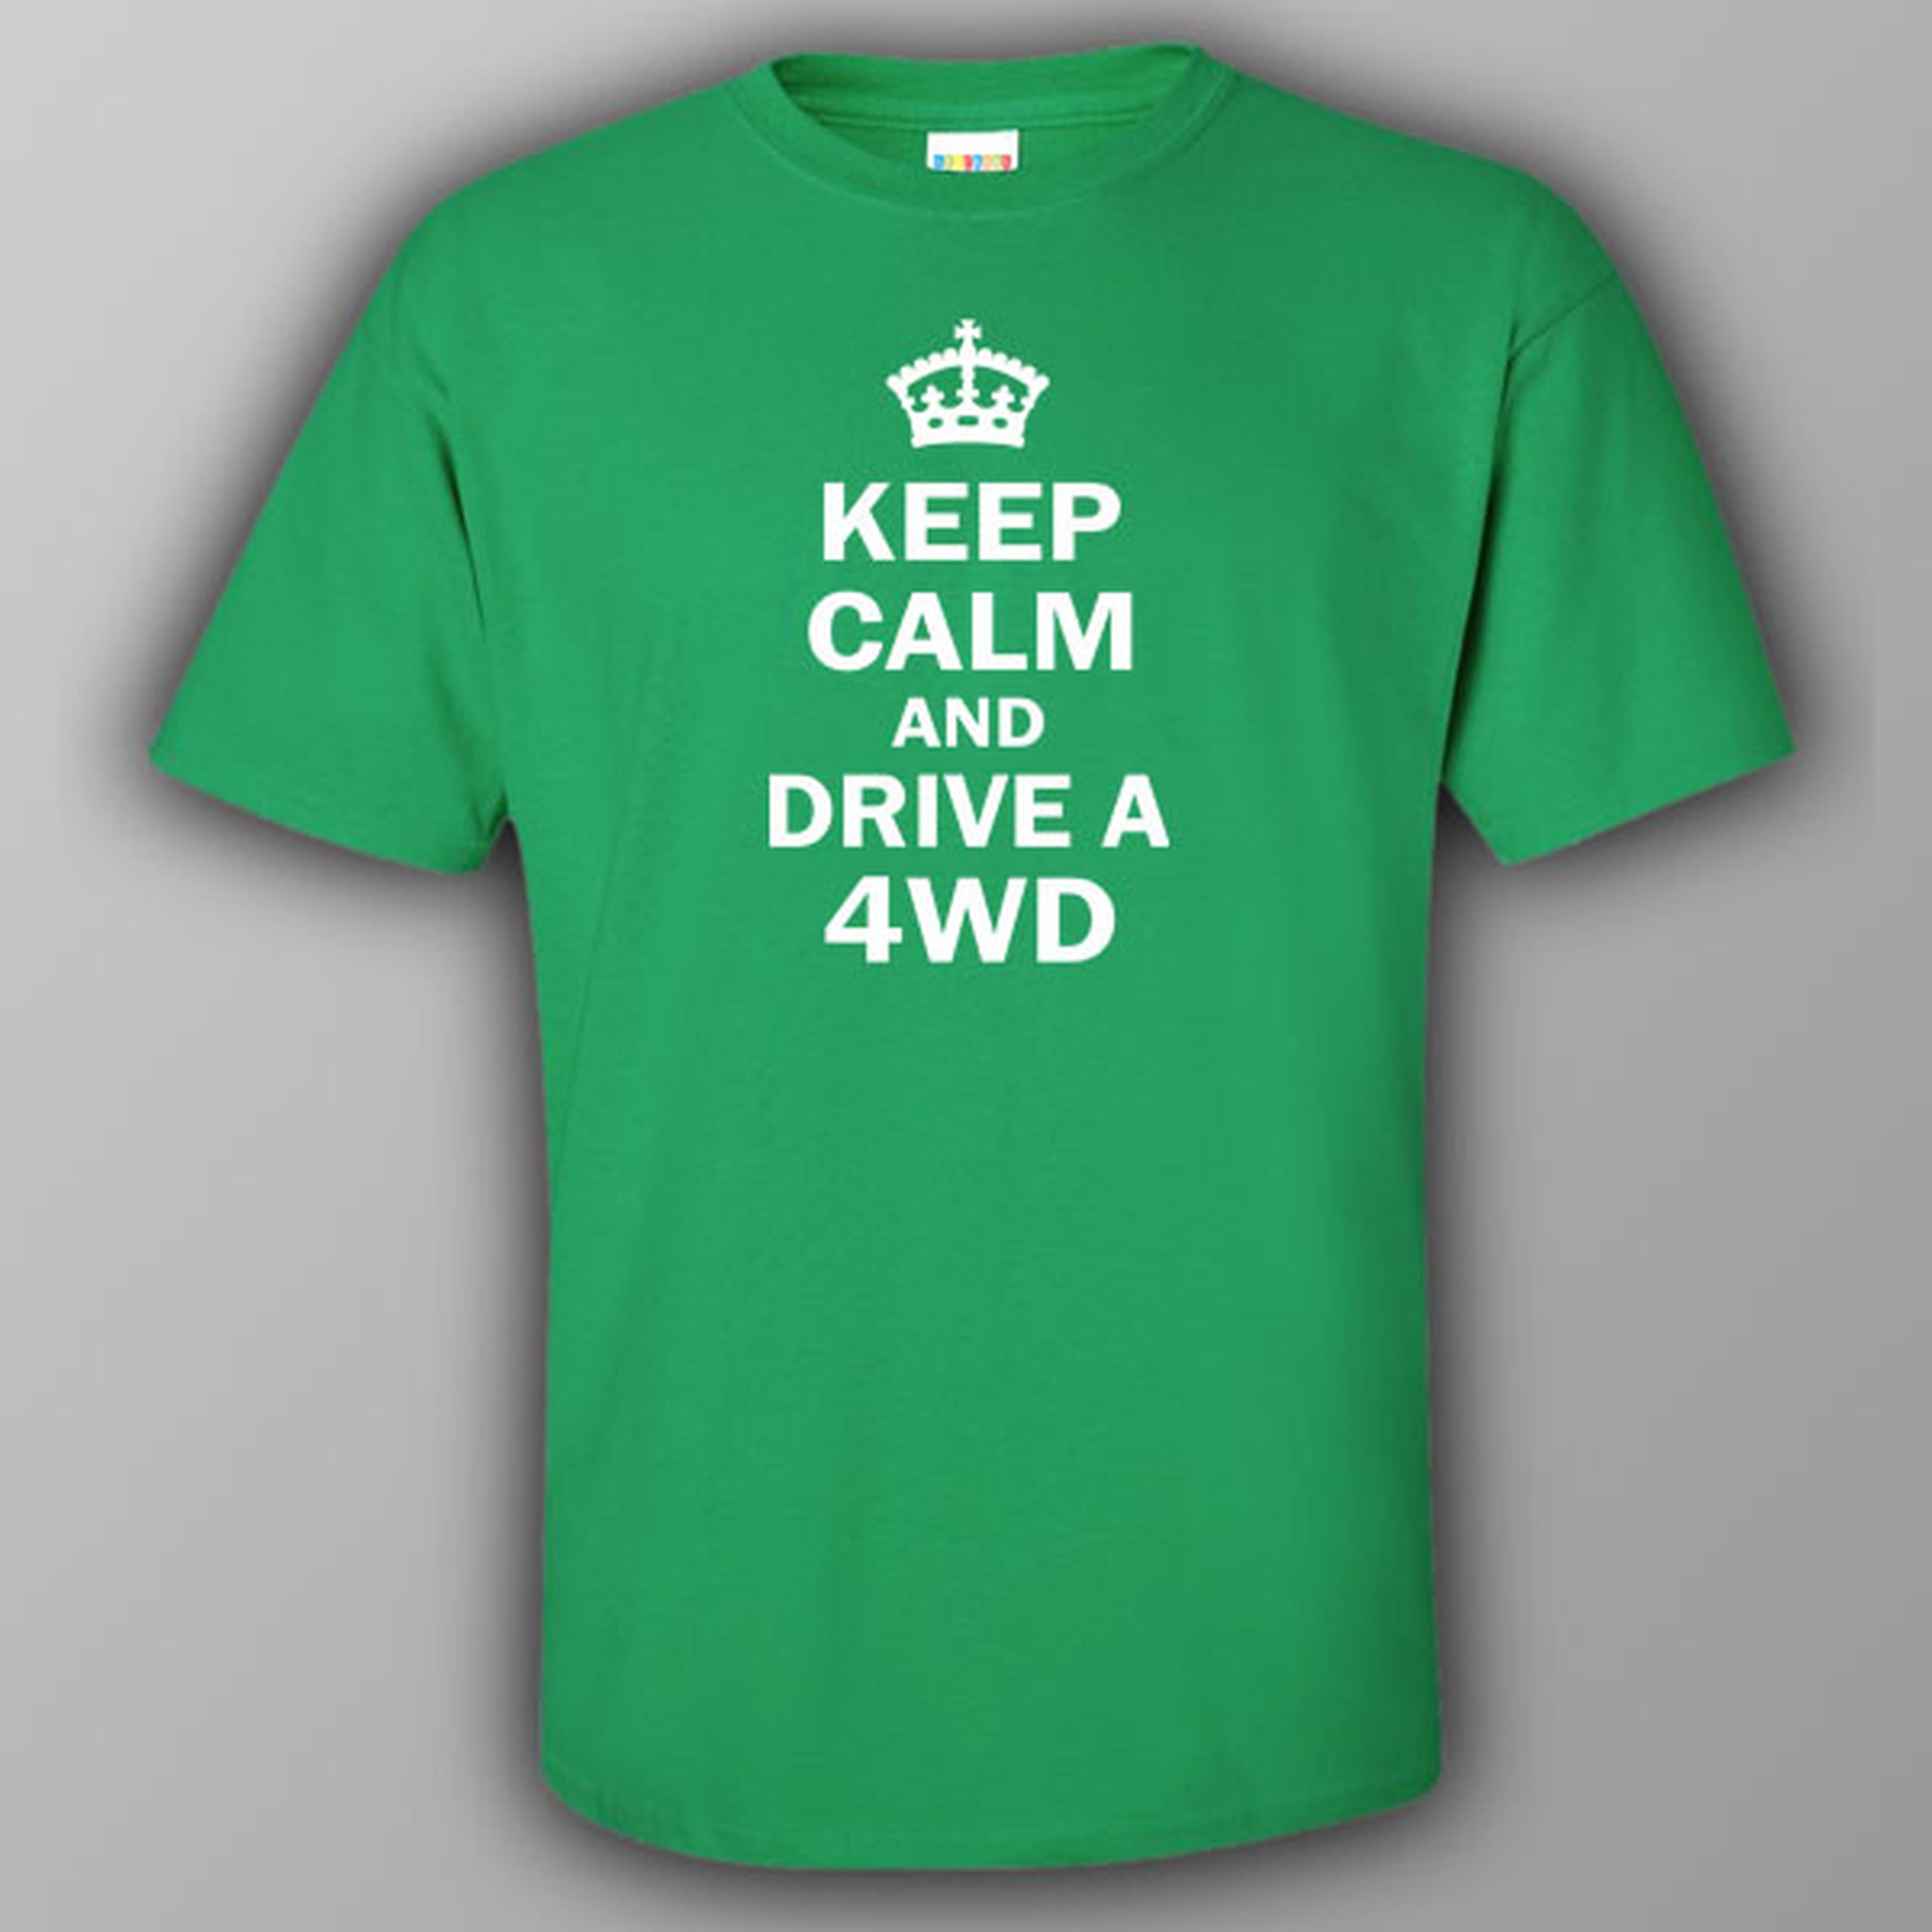 Keep calm and drive a 4WD - T-shirt